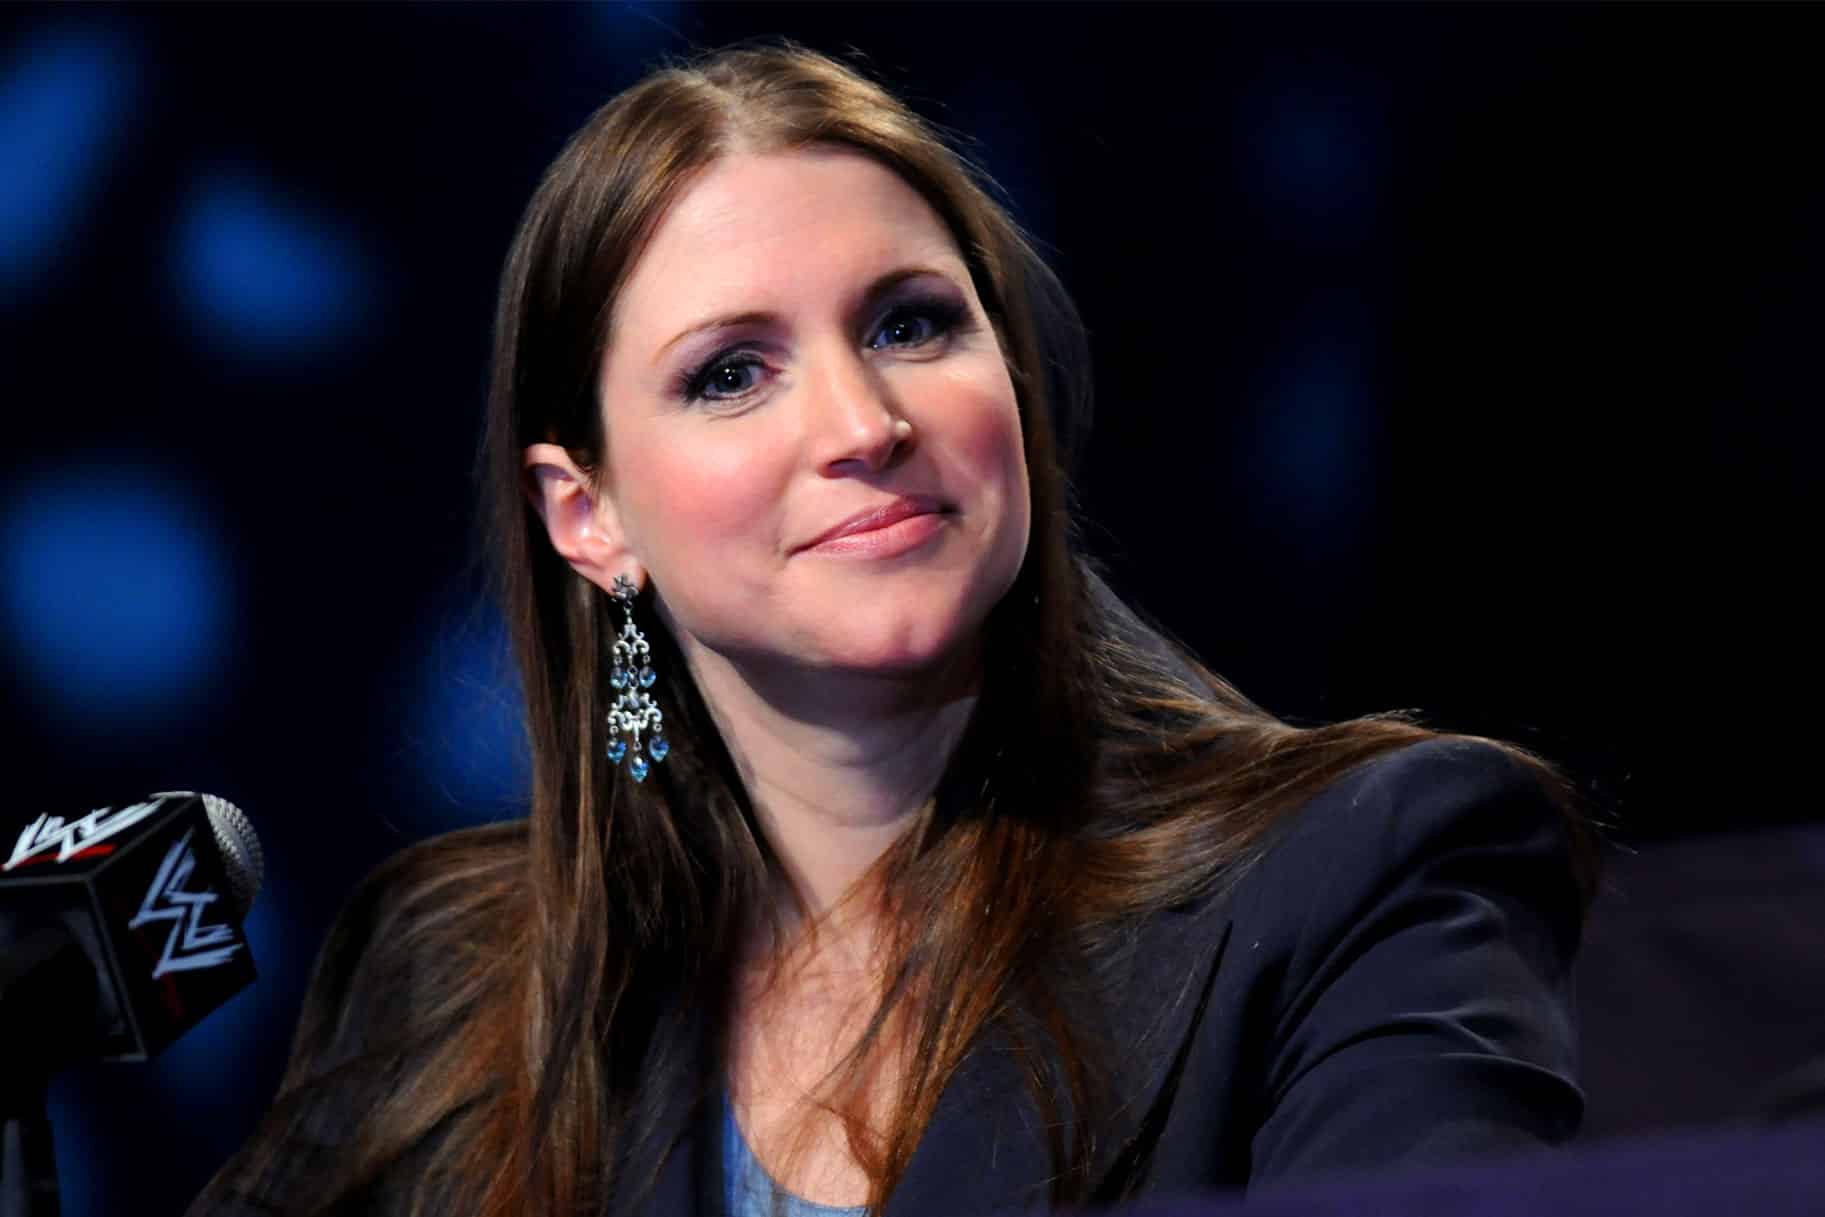 Mideon revealed that he once invited Stephanie McMahon for a date, but Vince McMahon’s disapproval led to her turning him down.